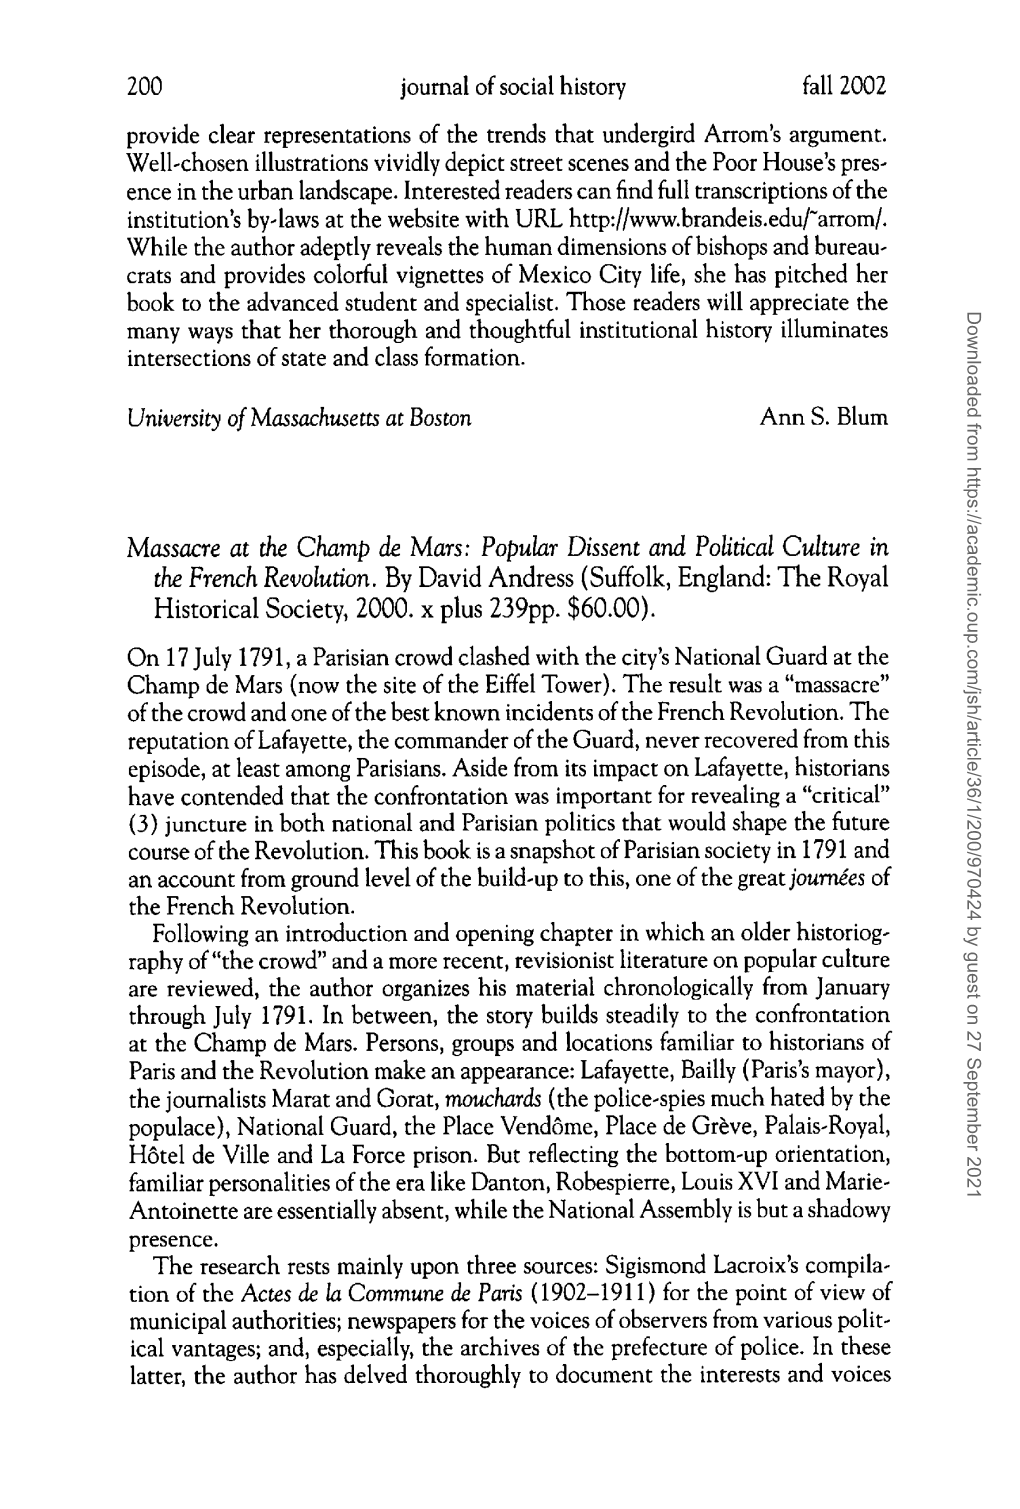 Popular Dissent and Political Culture in the French Revolution. by David Andress (Suffolk, England: the Royal Historical Society, 2000